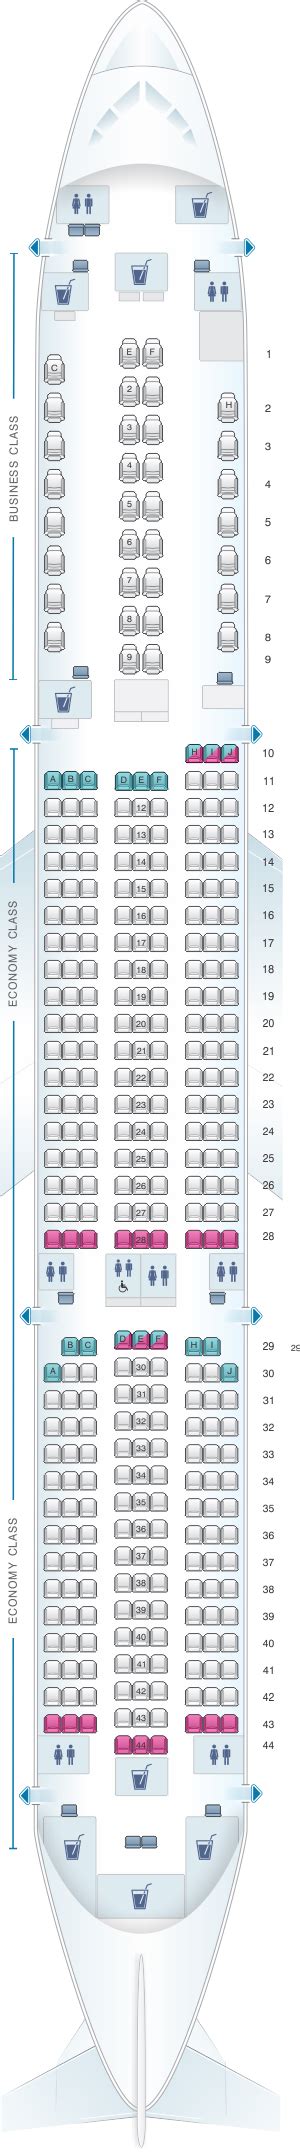 Delta Airlines A350 900 Seat Map Tutor Suhu